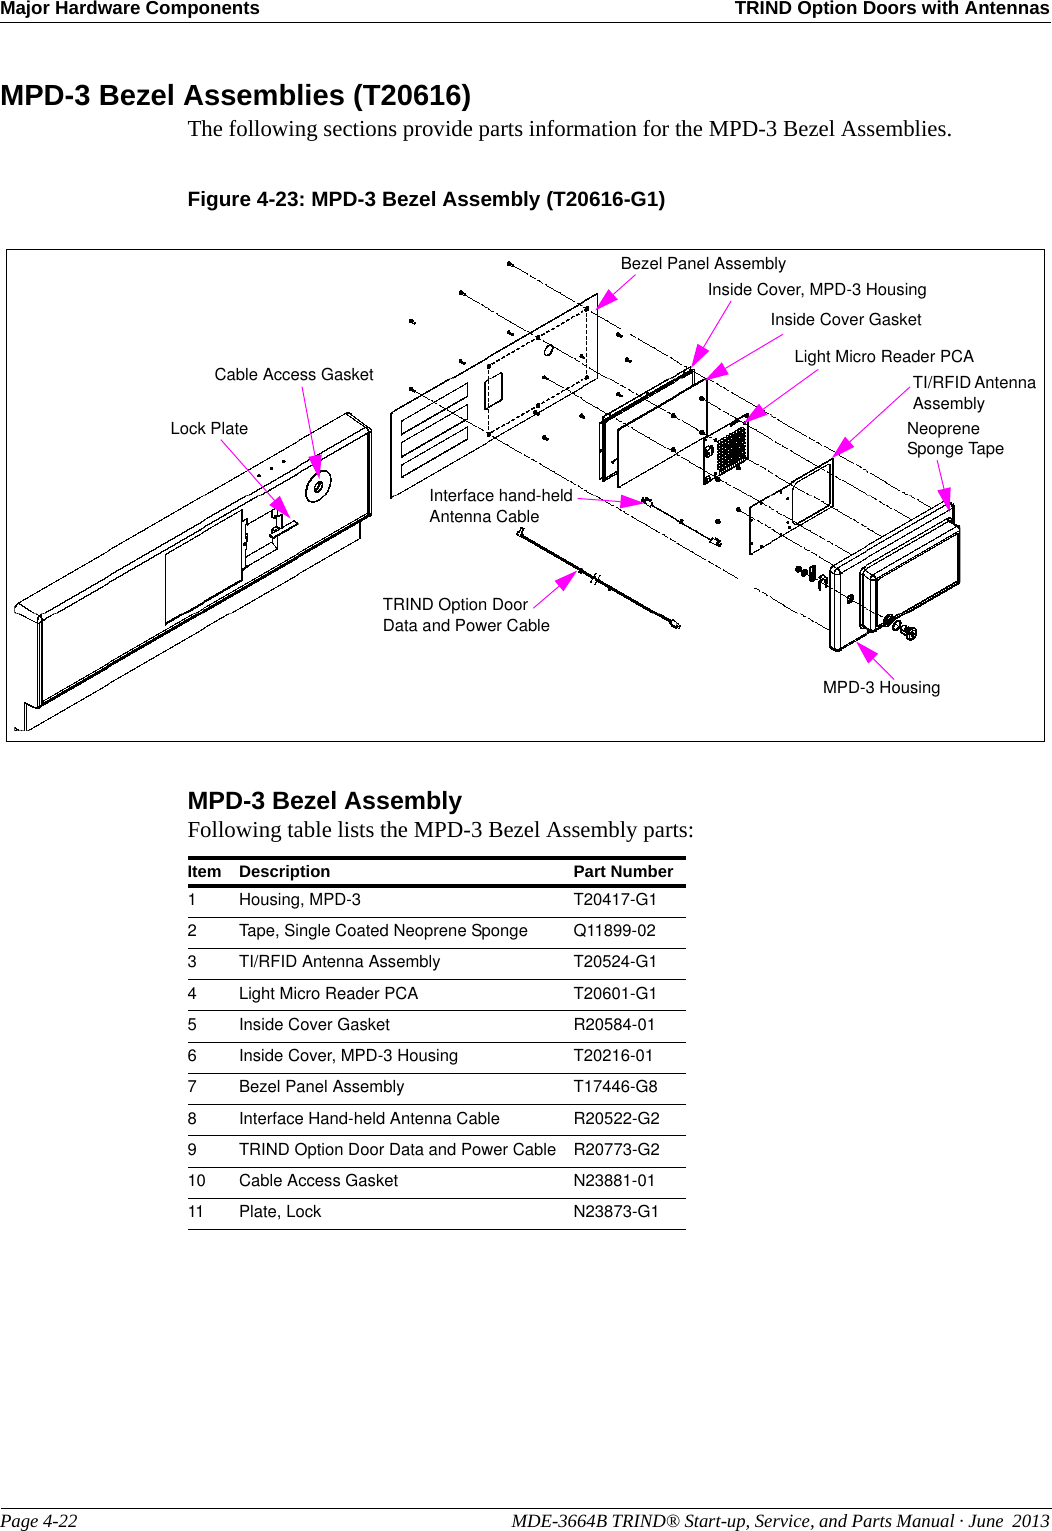 Major Hardware Components TRIND Option Doors with AntennasPage 4-22                                                                                                  MDE-3664B TRIND® Start-up, Service, and Parts Manual · June  2013MPD-3 Bezel Assemblies (T20616)The following sections provide parts information for the MPD-3 Bezel Assemblies.Figure 4-23: MPD-3 Bezel Assembly (T20616-G1) MPD-3 HousingNeoprene Sponge TapeTI/RFID Antenna AssemblyLight Micro Reader PCAInside Cover GasketInside Cover, MPD-3 HousingBezel Panel AssemblyCable Access GasketLock PlateInterface hand-held Antenna CableTRIND Option Door Data and Power CableMPD-3 Bezel AssemblyFollowing table lists the MPD-3 Bezel Assembly parts:Item Description Part Number1Housing, MPD-3 T20417-G12Tape, Single Coated Neoprene Sponge Q11899-023TI/RFID Antenna Assembly T20524-G14Light Micro Reader PCA T20601-G15Inside Cover Gasket R20584-016Inside Cover, MPD-3 Housing T20216-017Bezel Panel Assembly T17446-G88Interface Hand-held Antenna Cable R20522-G29TRIND Option Door Data and Power Cable R20773-G210 Cable Access Gasket N23881-0111 Plate, Lock N23873-G1